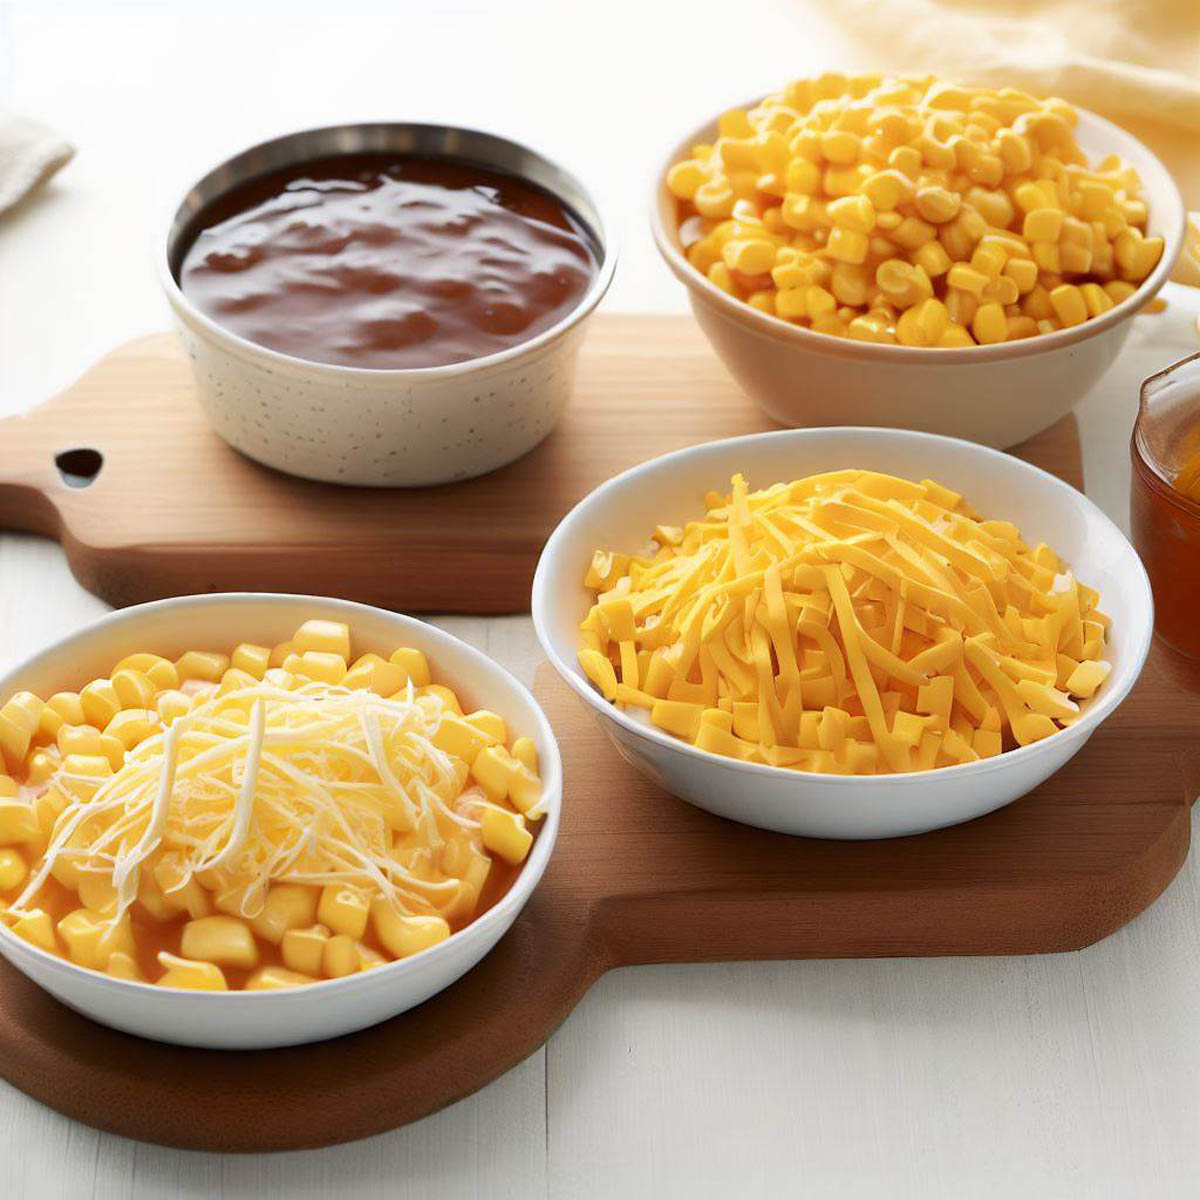 Separate bowls of gravy, corn, and cheese - ingredients for KFC Famous Bowl Casserole.